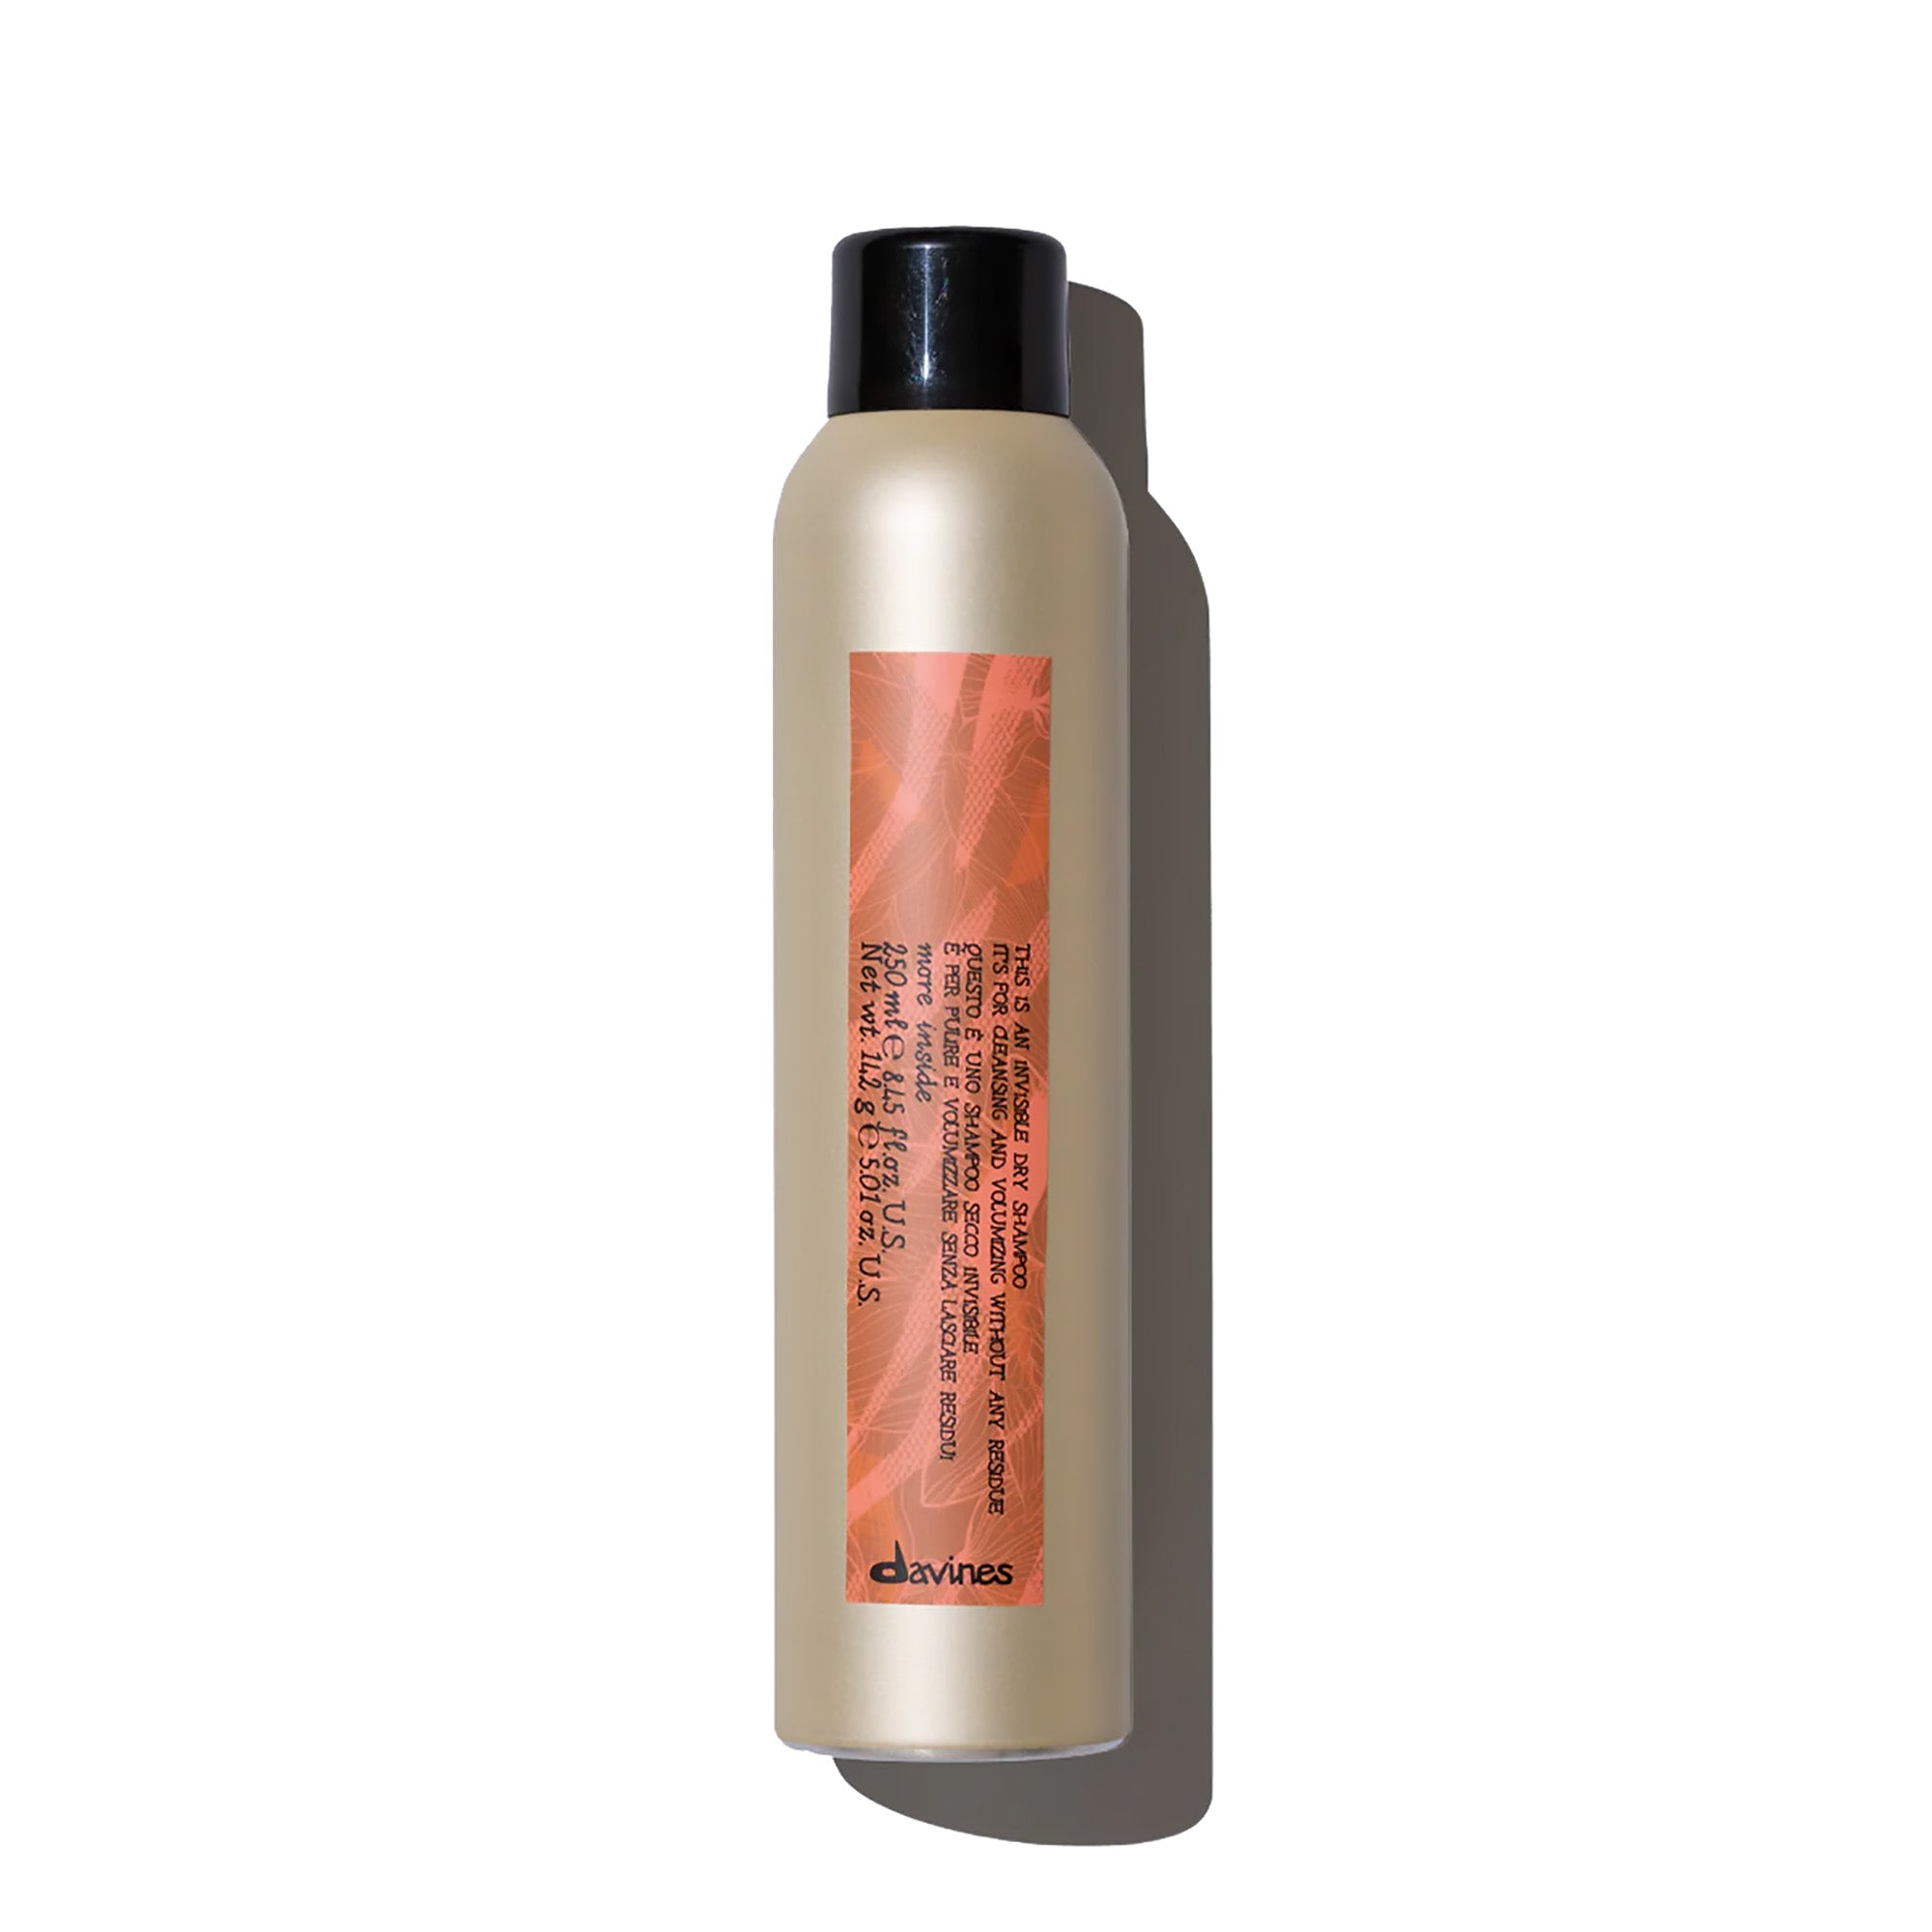 Davines This is an Invisible Dry Shampoo / 5OZ